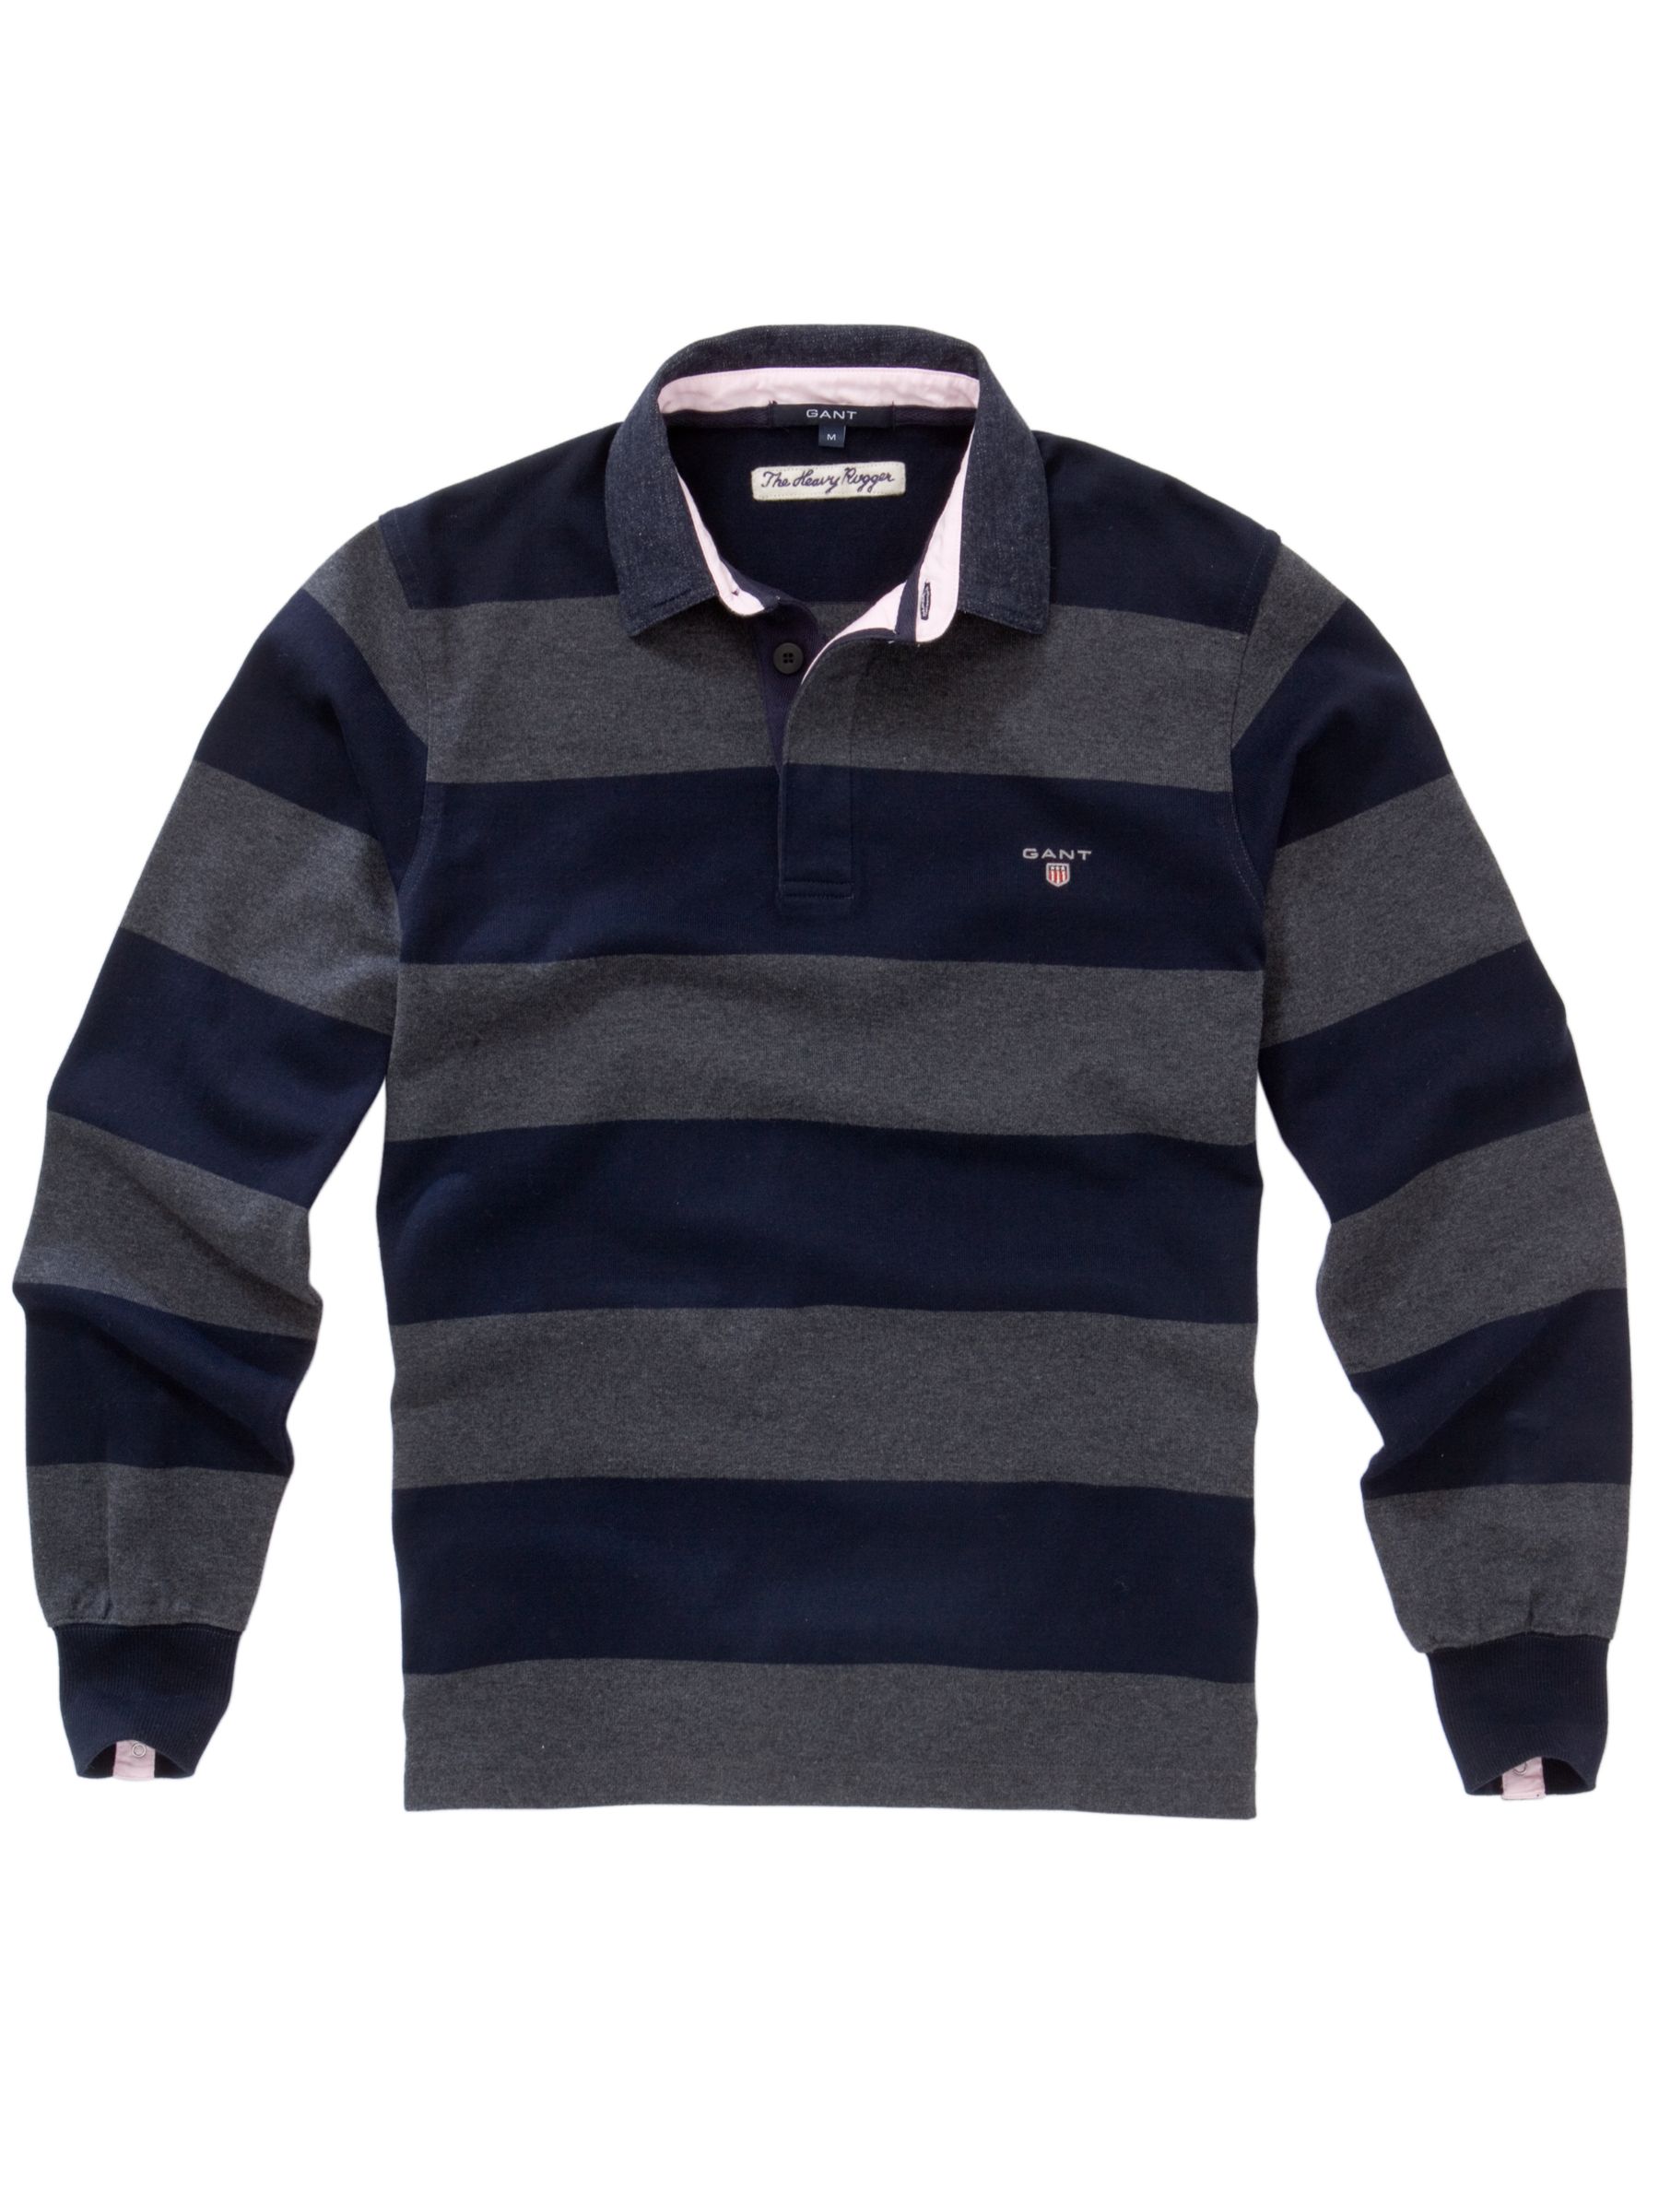 The Heavy Rugger Stripe Rugby Shirt,